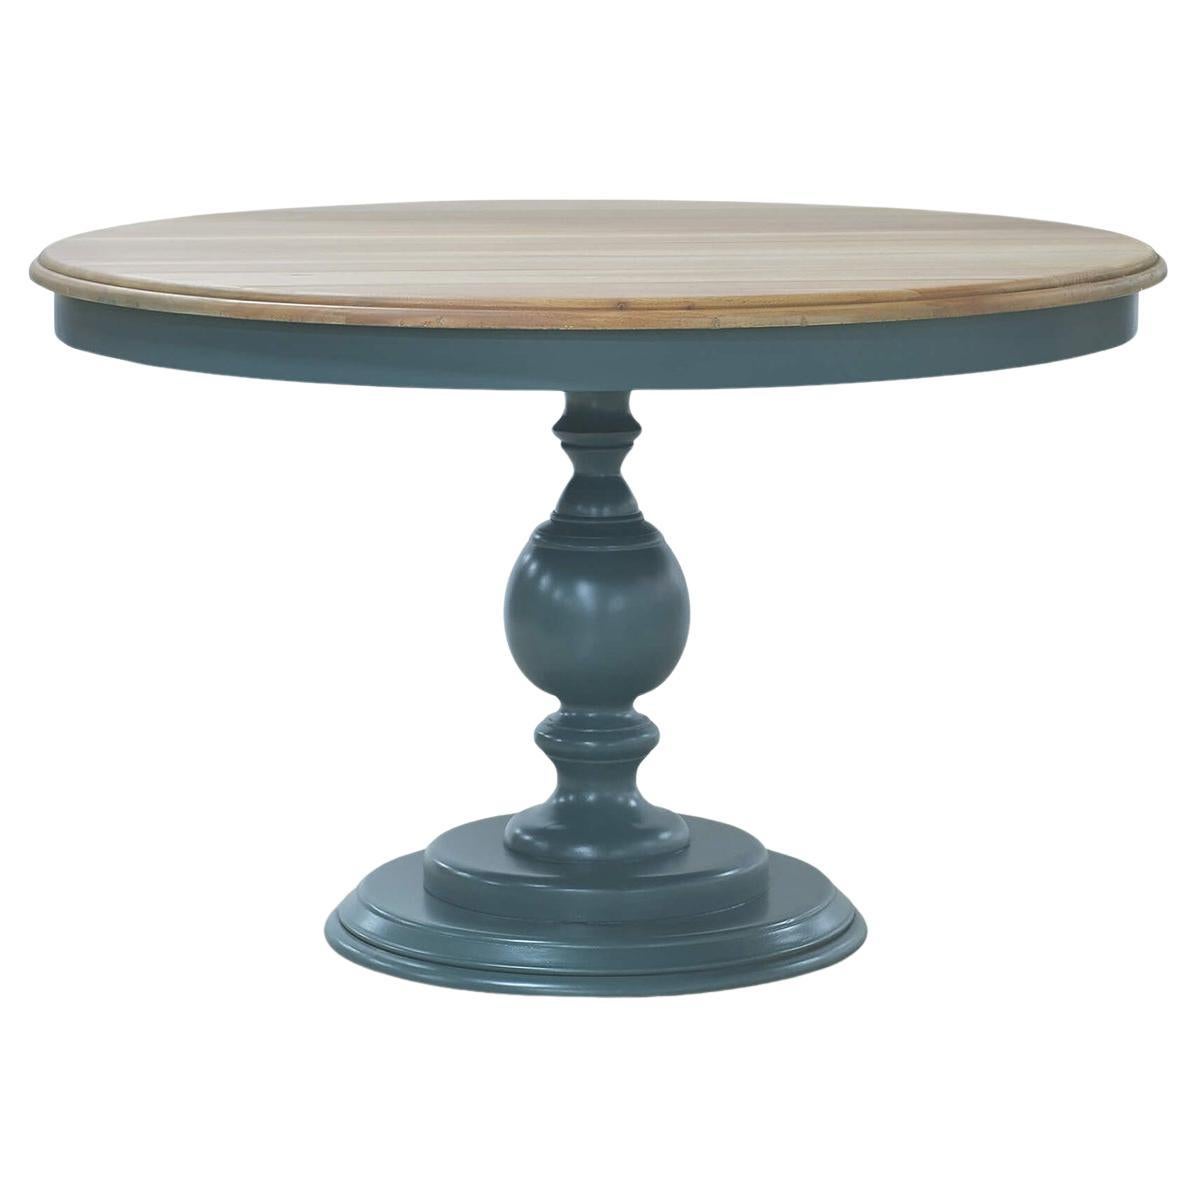 Custom Painted Provincial Dining Table - 48 For Sale